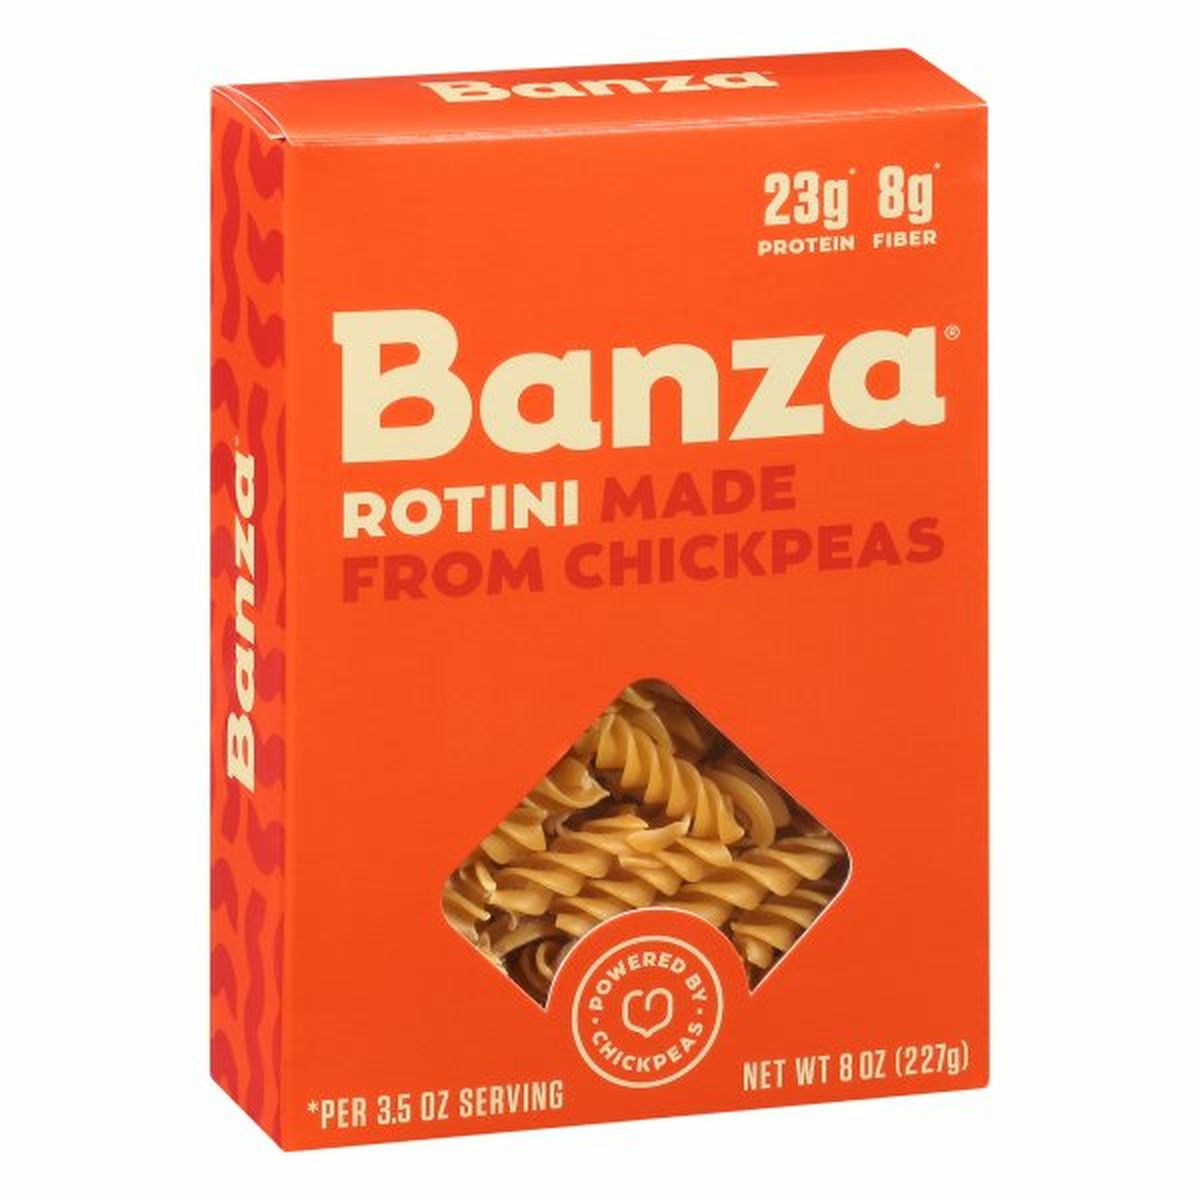 Calories in Banza Rotini, Made from Chickpeas